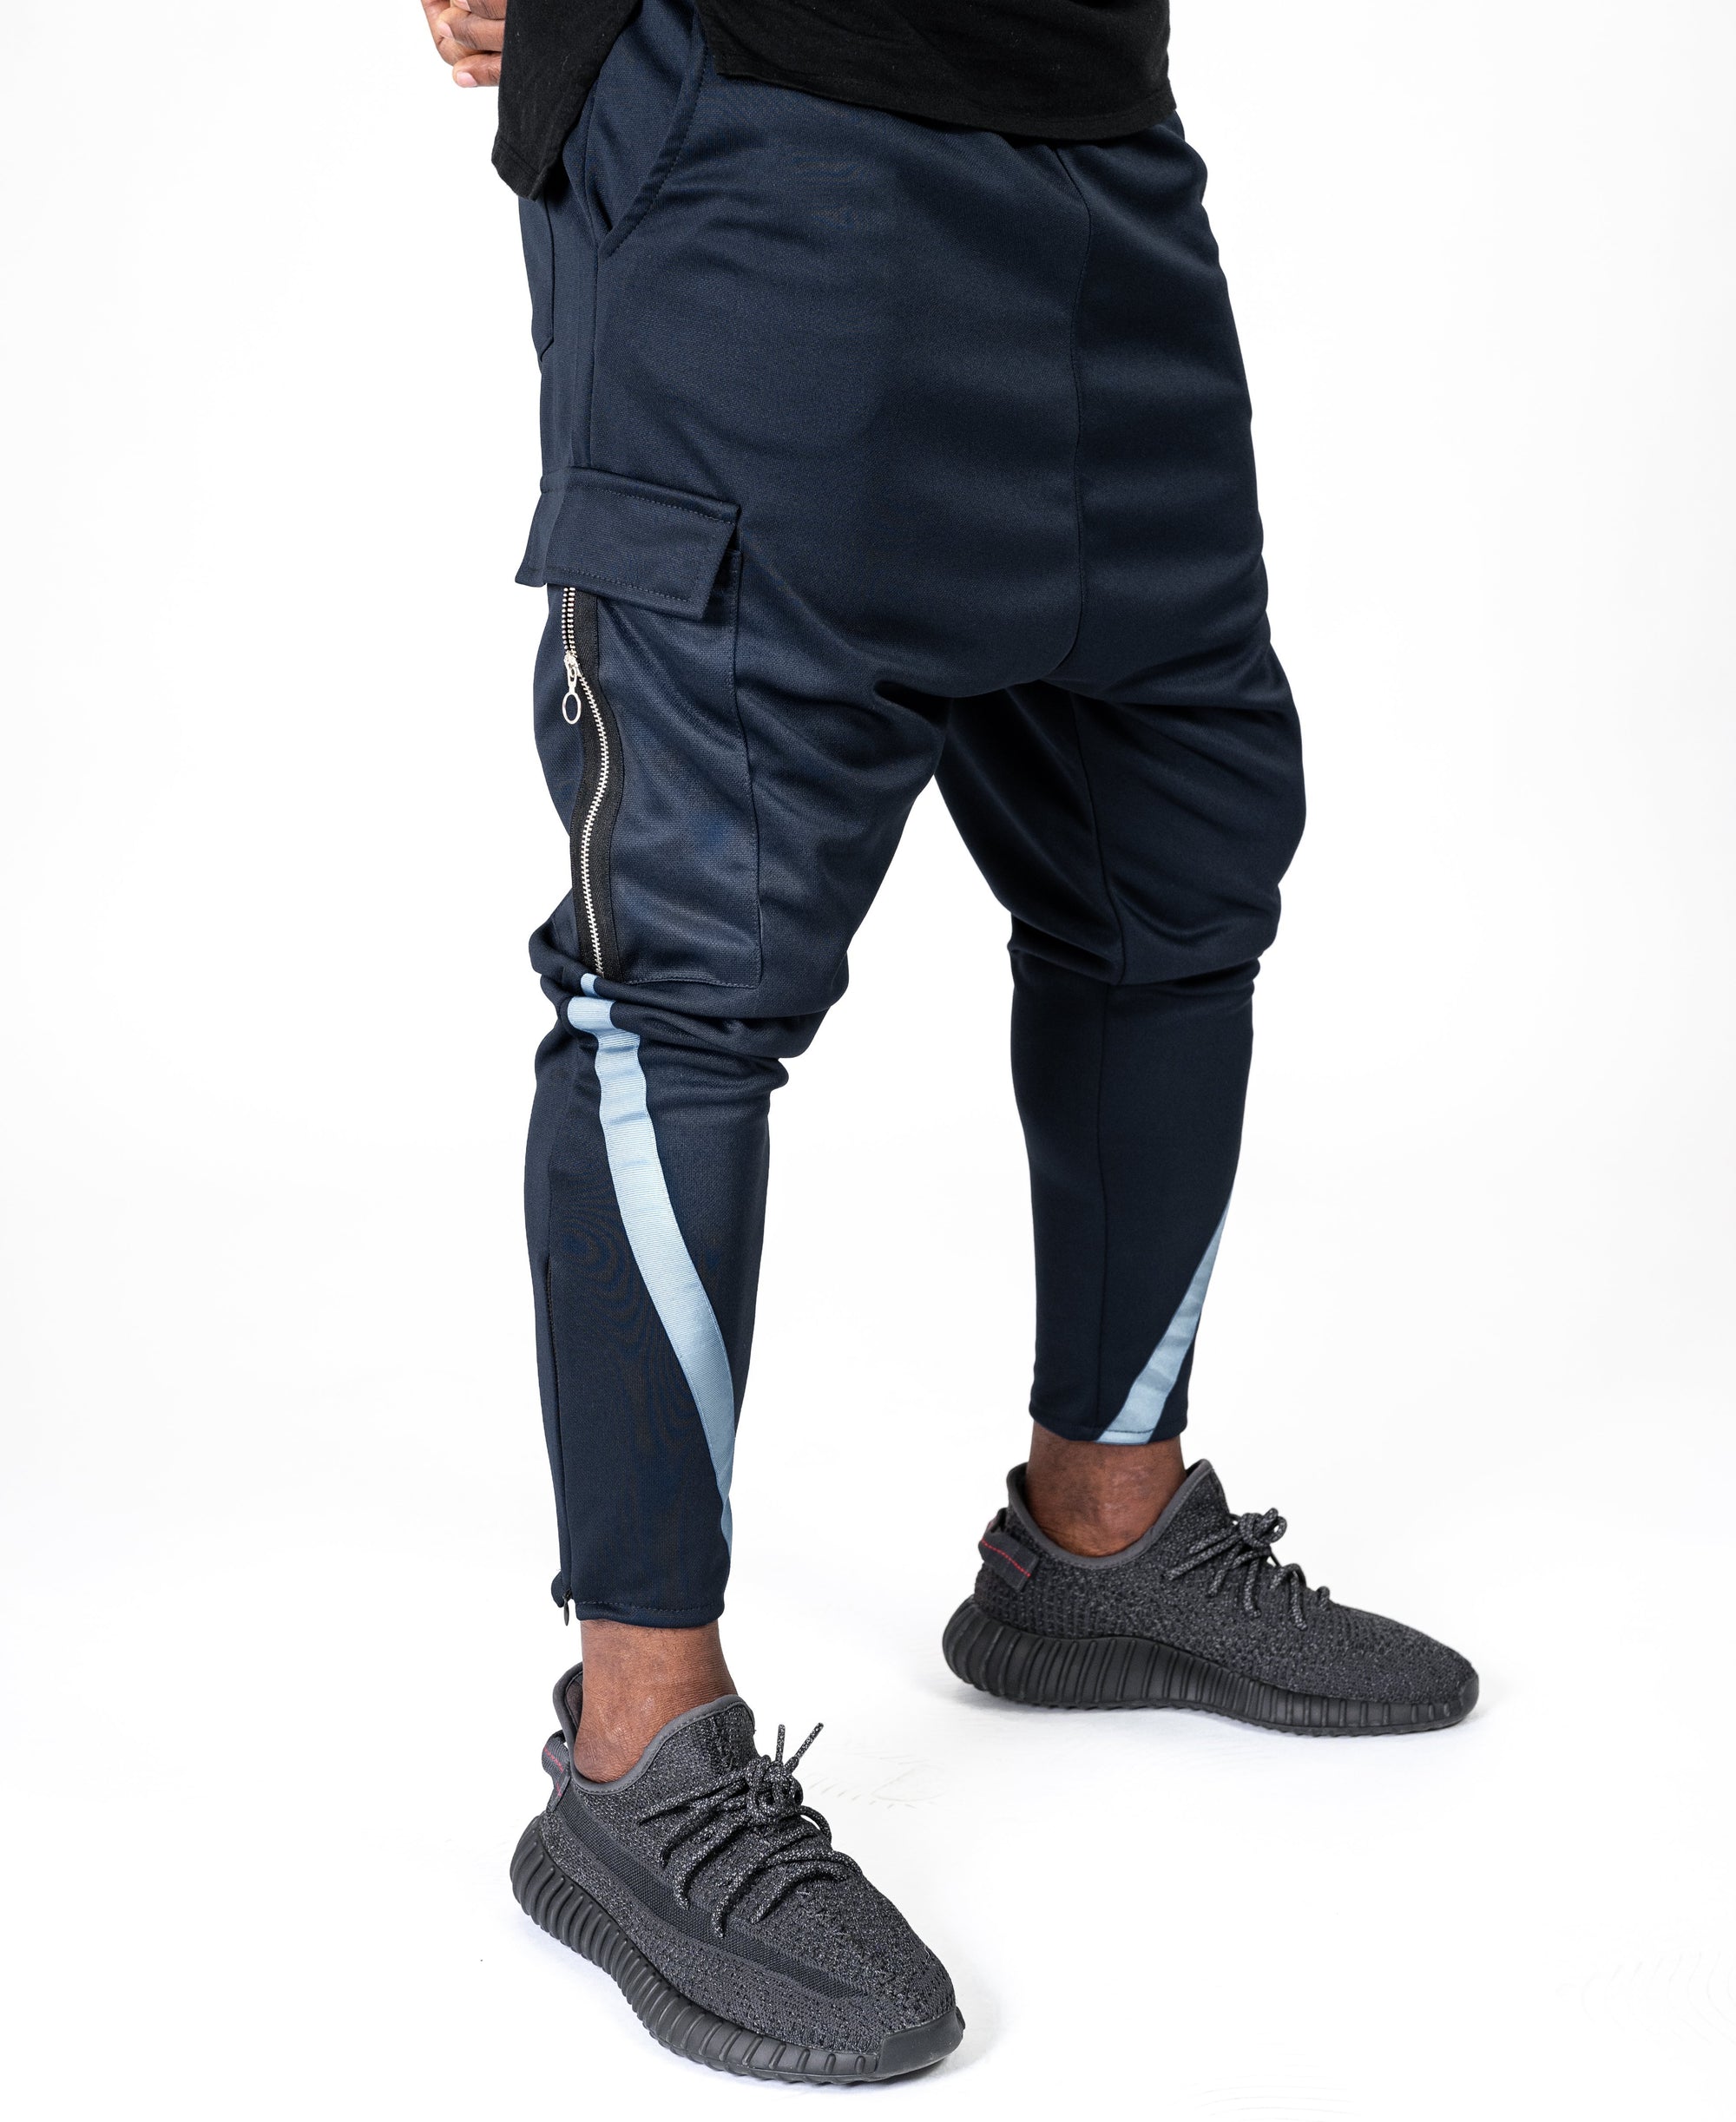 Bleumarin trousers with blue lines - Fatai Style